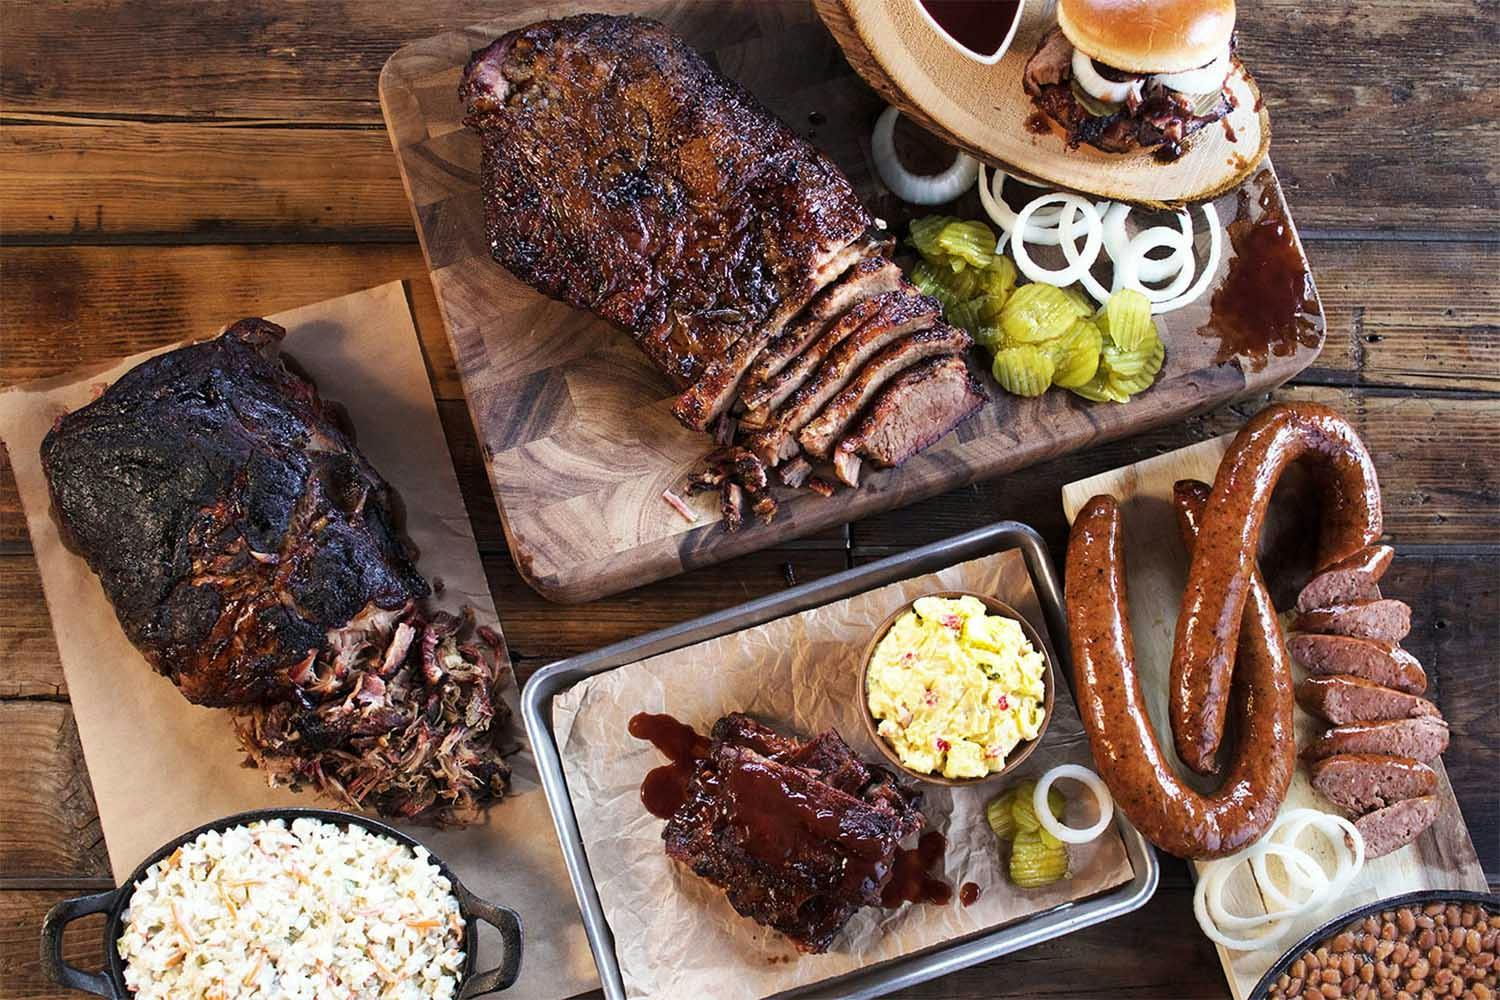 The San Diego Union-Tribune: San Diego's best BBQ: Here's where to make a pit stop